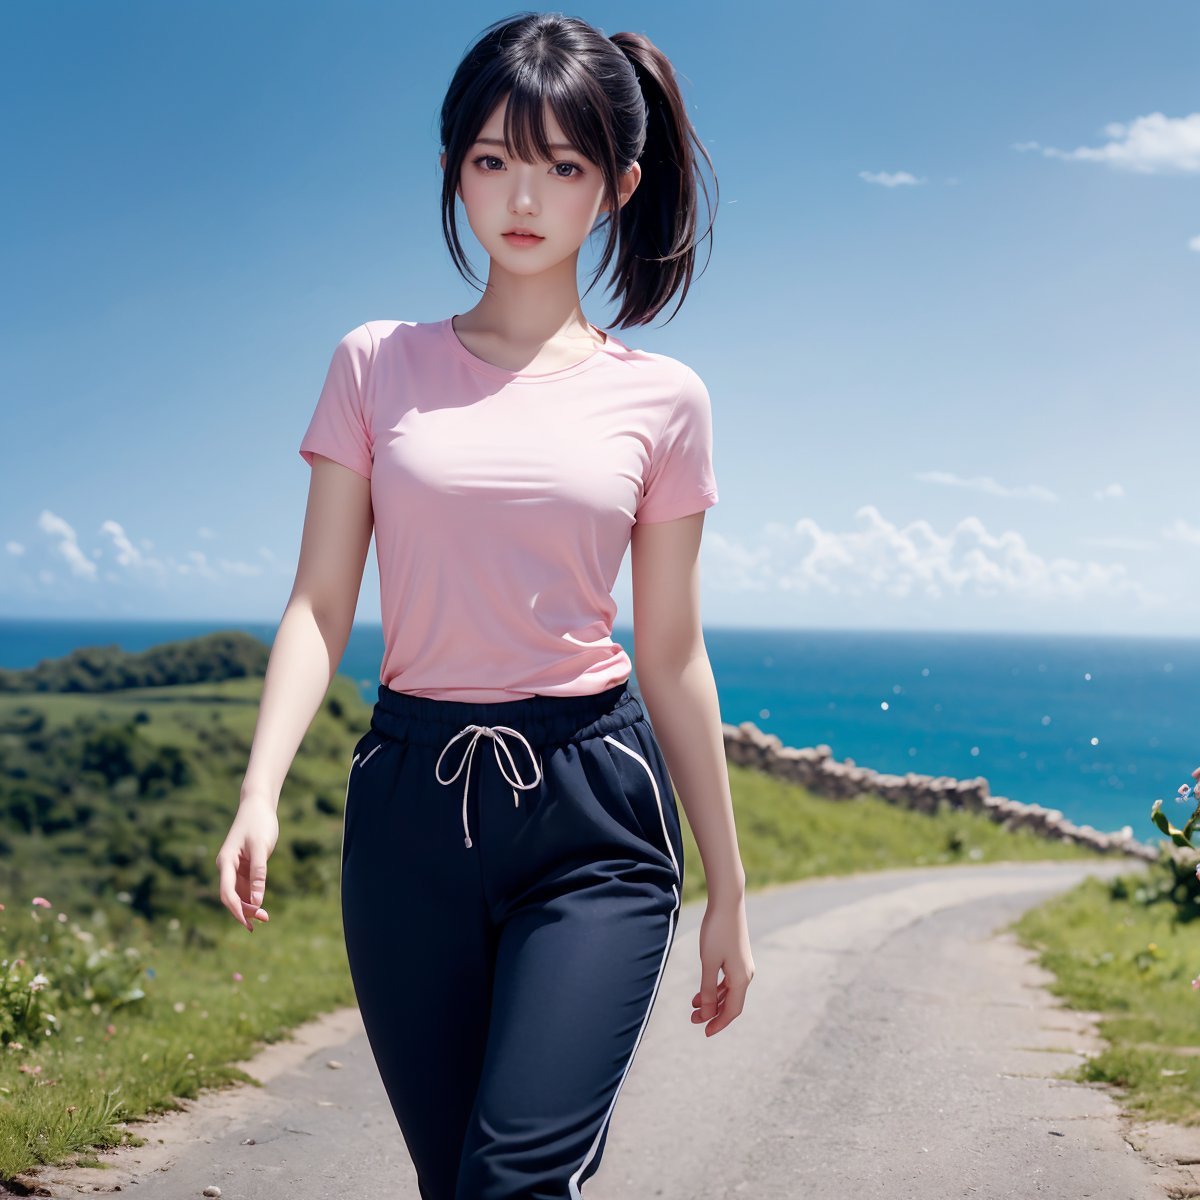 Fractal art that is mesmerizing and visually stunning. Official art, masterpiece. 4K high resolution rendering. One Japanese girl. 17 years old. Black hair (ponytail, bangs). Black eyes. Low stature, small breasts, beautiful legs.
Pink short_sleeve T-shirt. Blue track_pants. She walks along a winding road along a bluff. Ocean, blue sky. Solo. cowboy_shot.